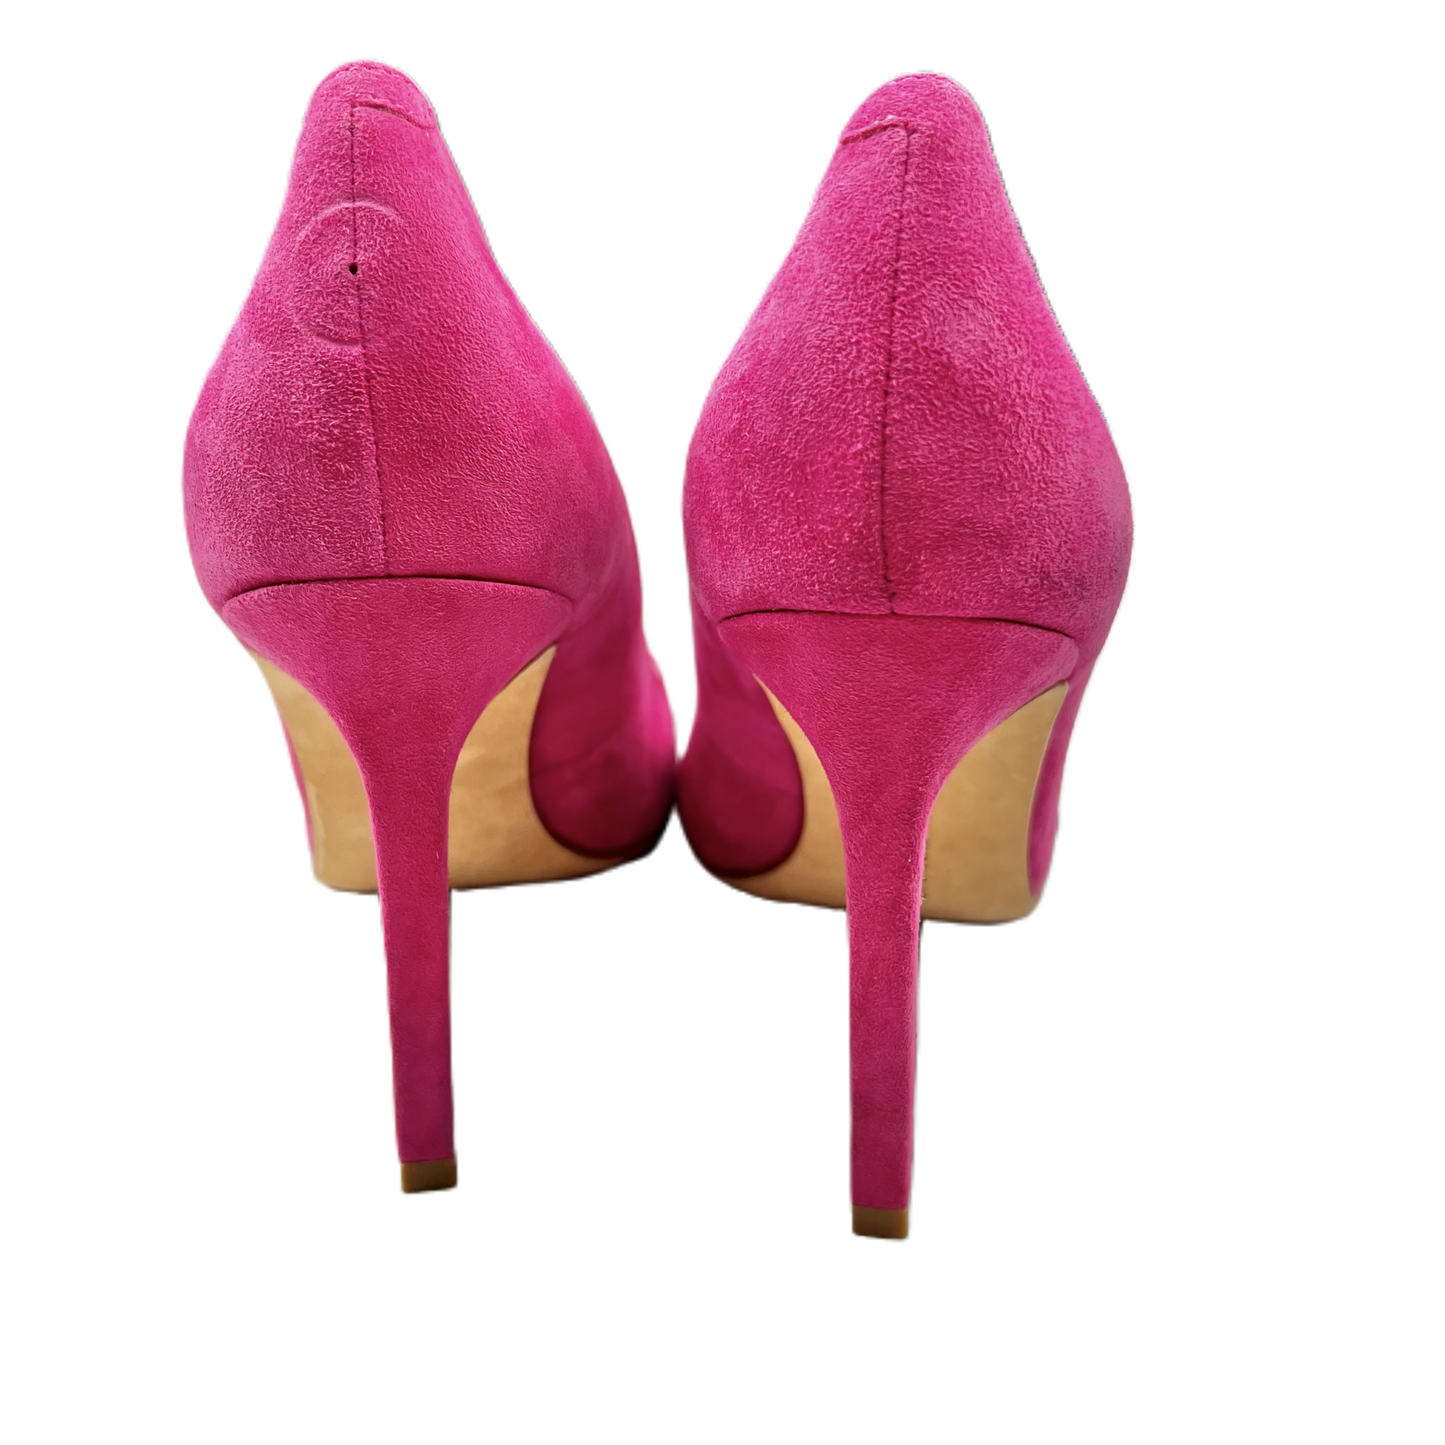 Pink Shoes Heels Stiletto By Ivanka Trump, Size: 7